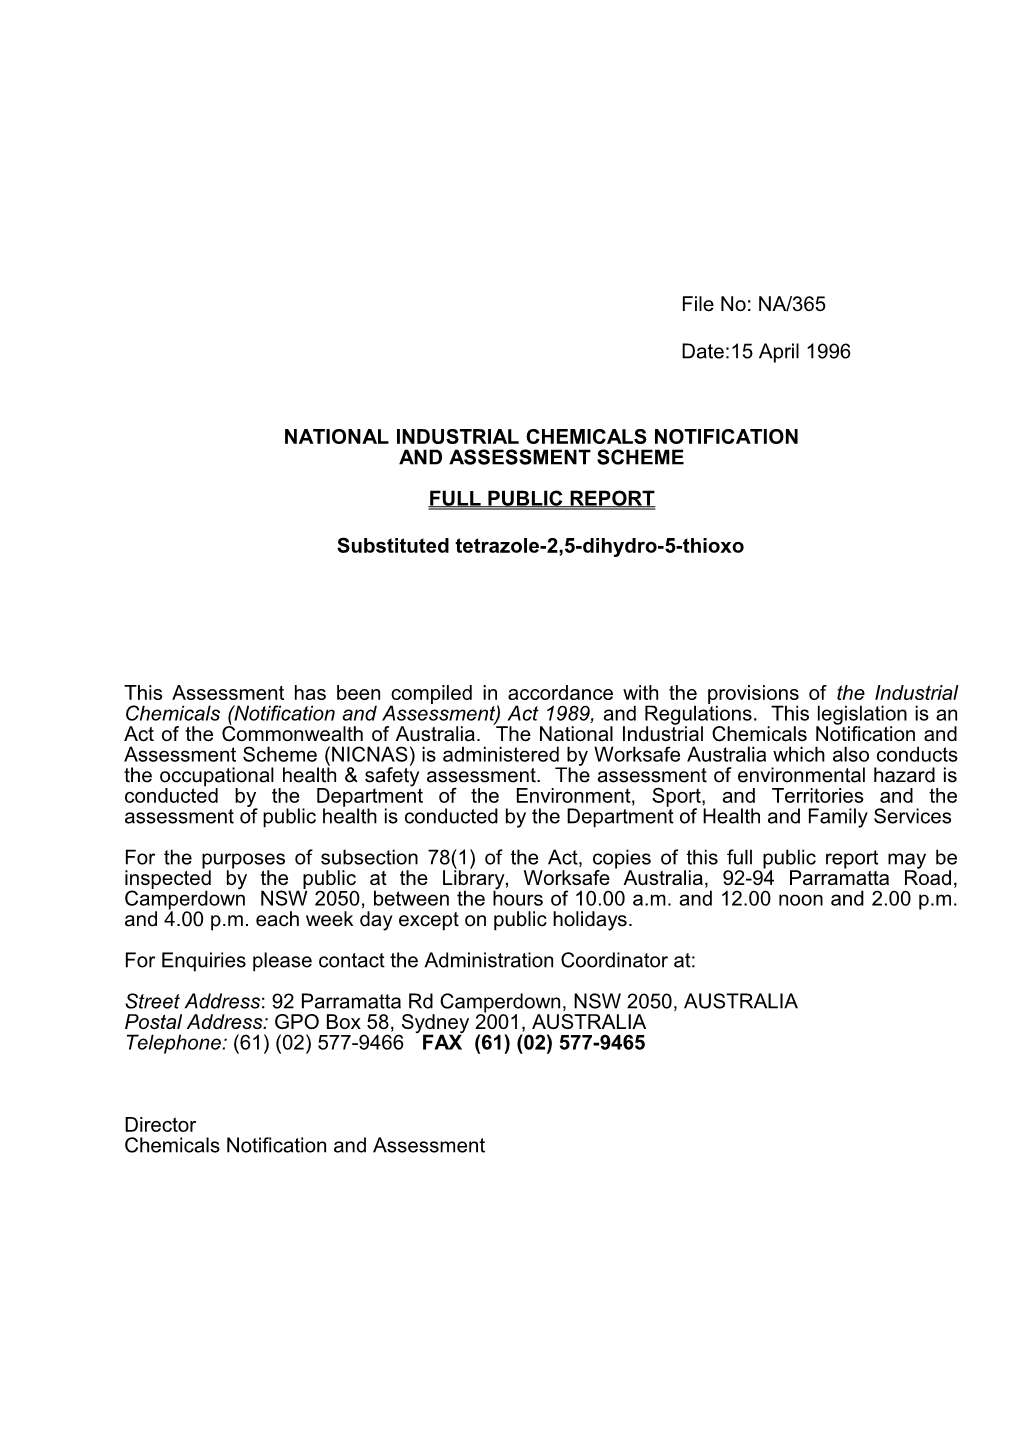 National Industrial Chemicals Notification s6